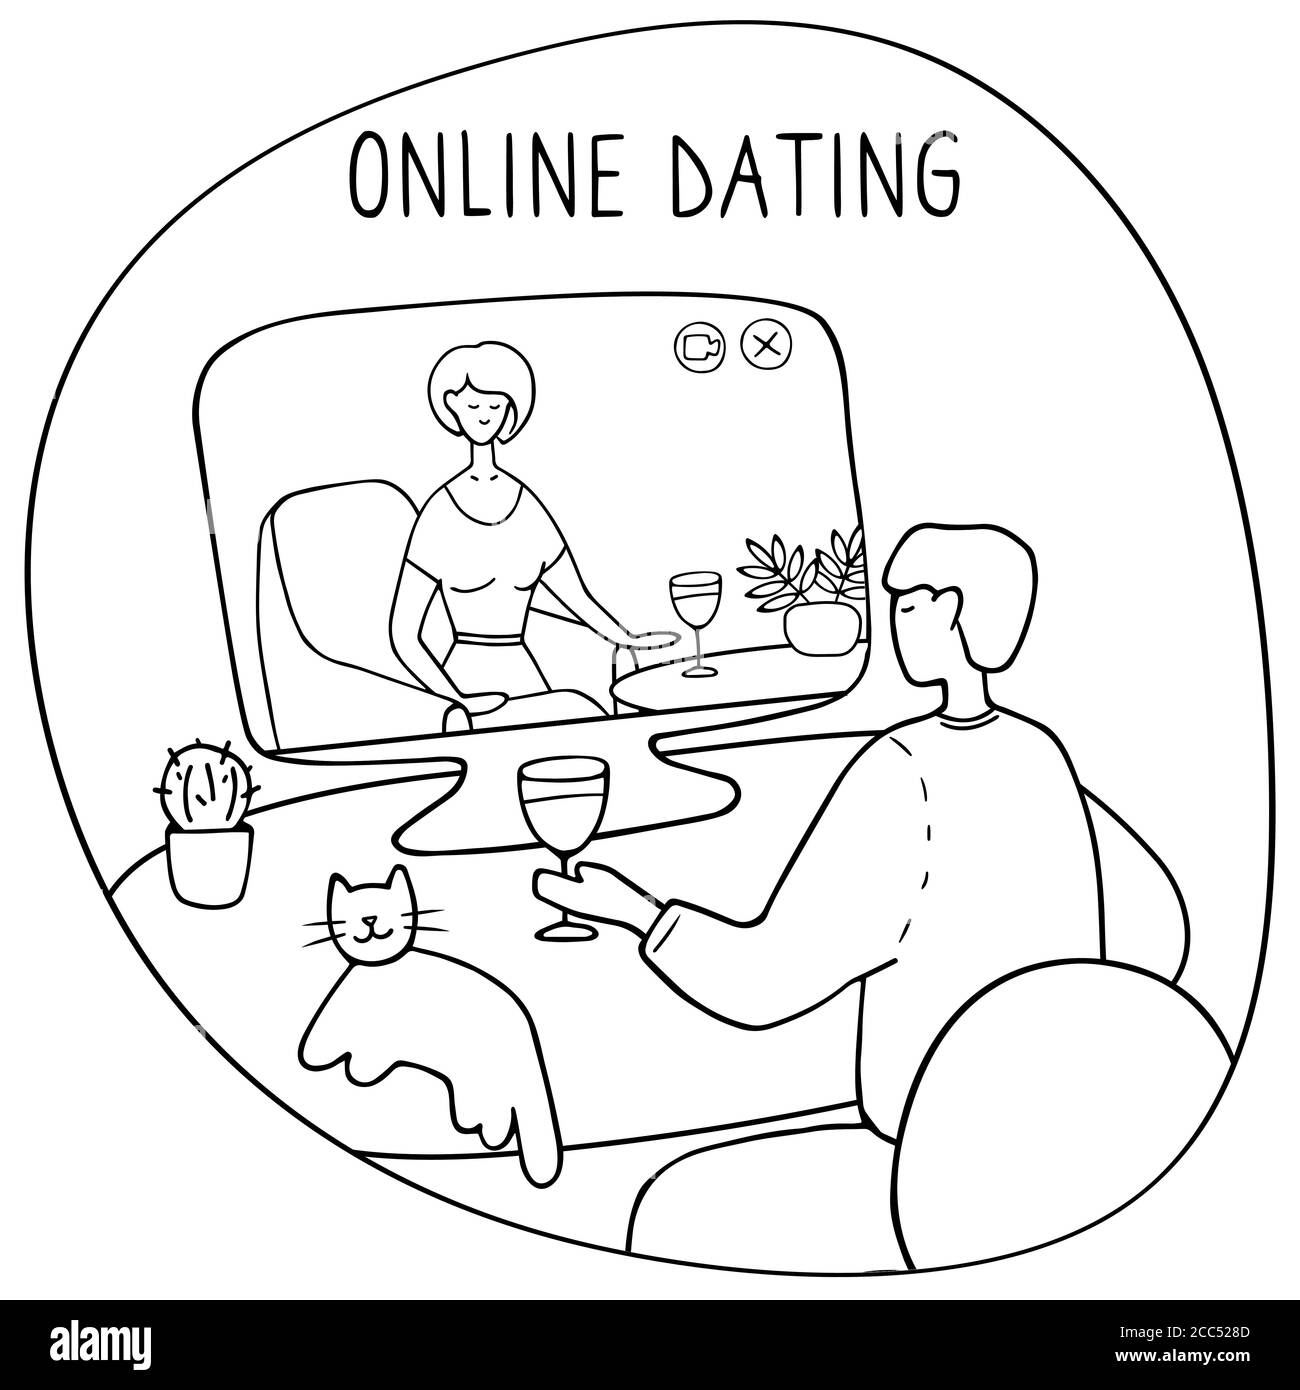 Young man sits in front of computer and talks with woman online. Girl and guy met online and build relationship at distance. Dating websites, internet Stock Vector